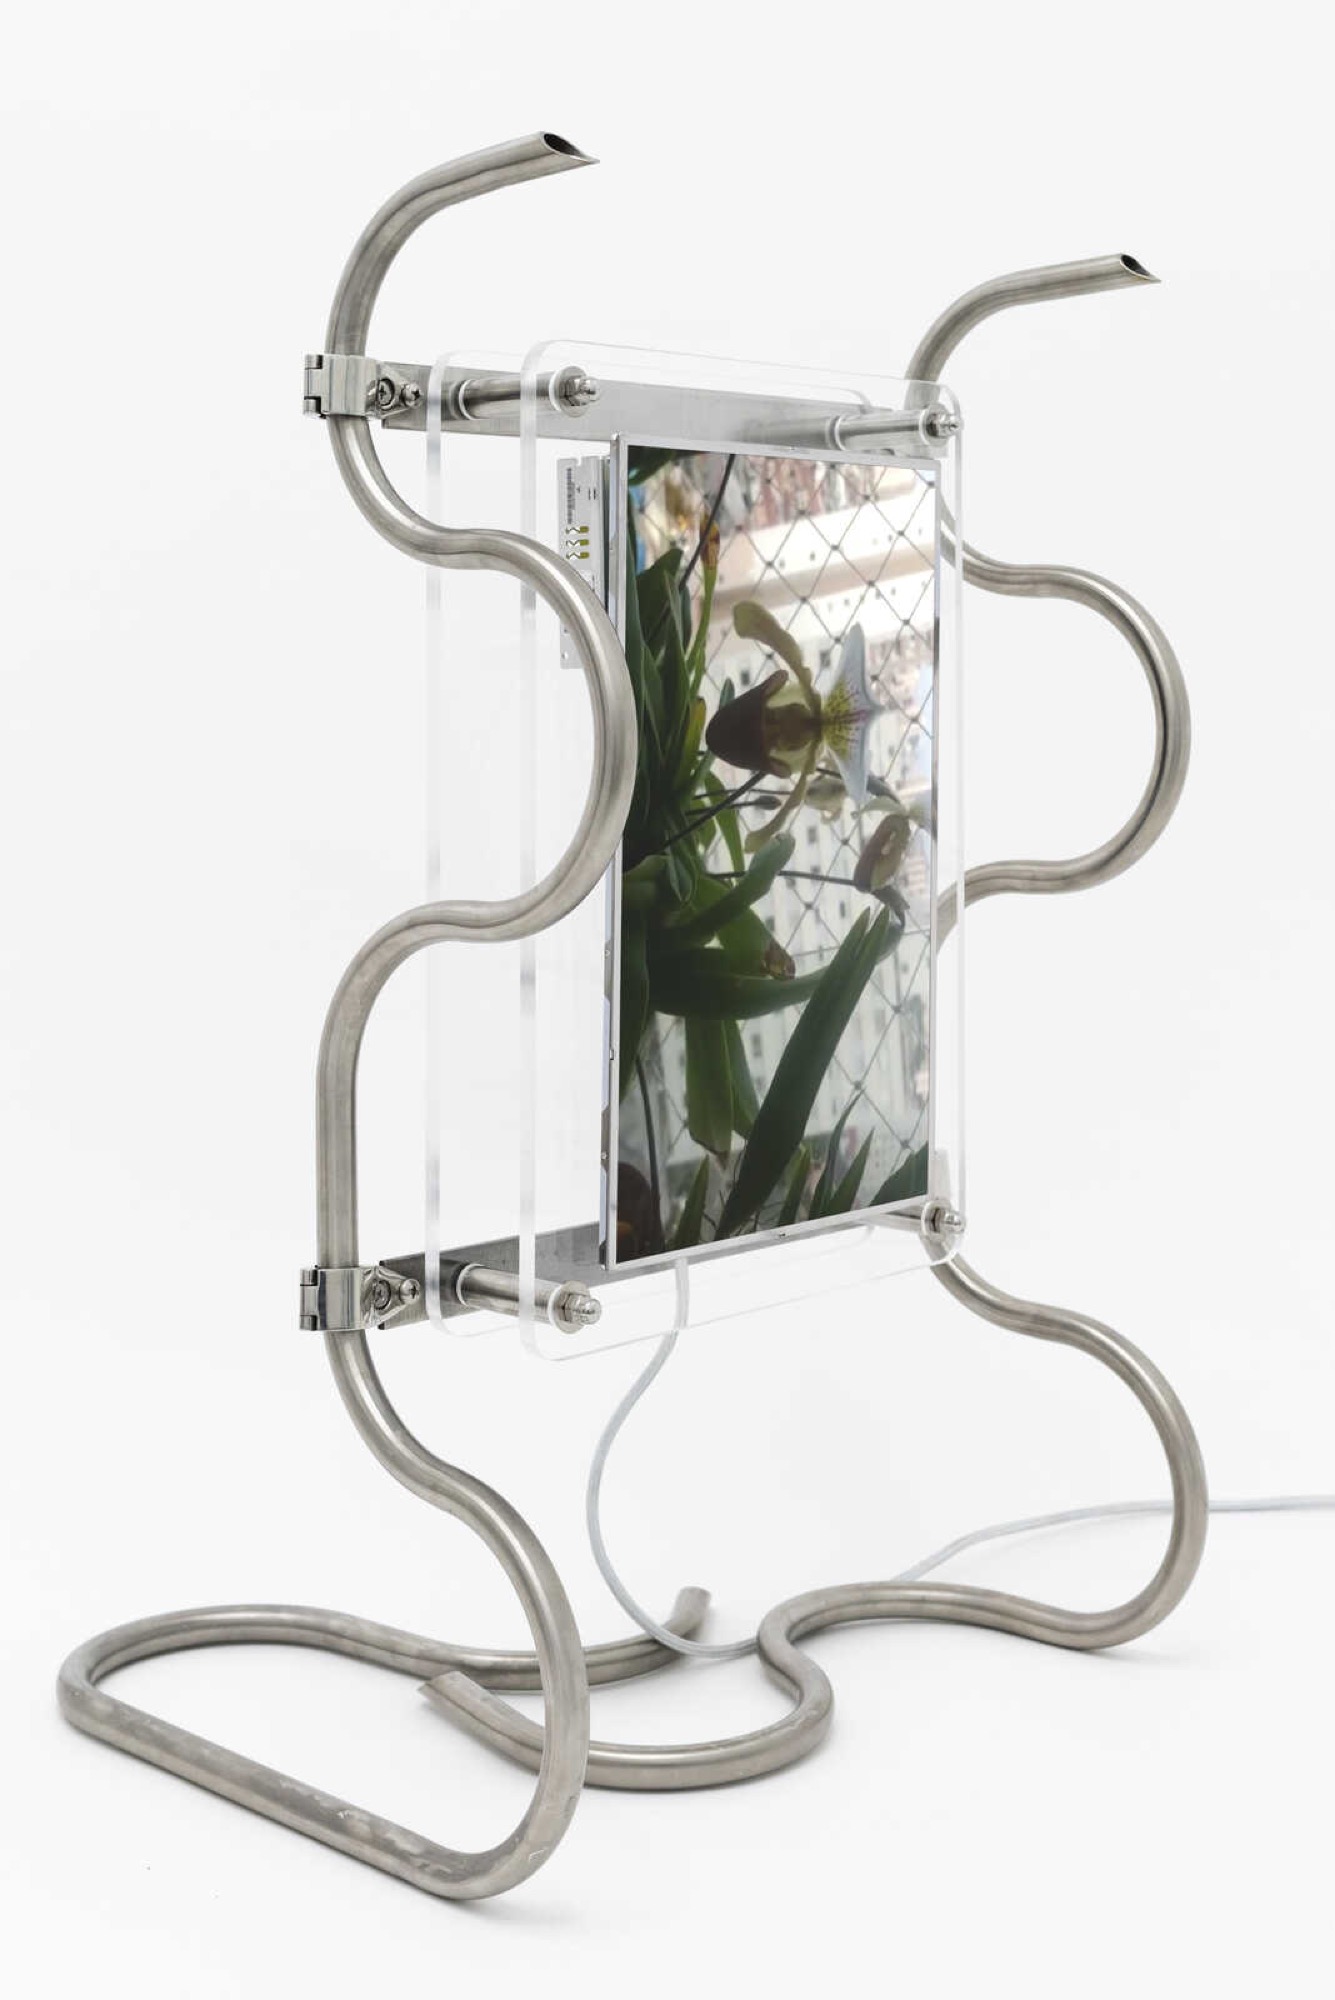 Amalia Lindo, <em>The Cloud is of the Earth (v.1)</em>, 2021. Single channel video installation, audio, 17” liquid-crystal display panel, LCD controller board, stainless steel tube, acrylic perspex. Courtesy Haydens Gallery.